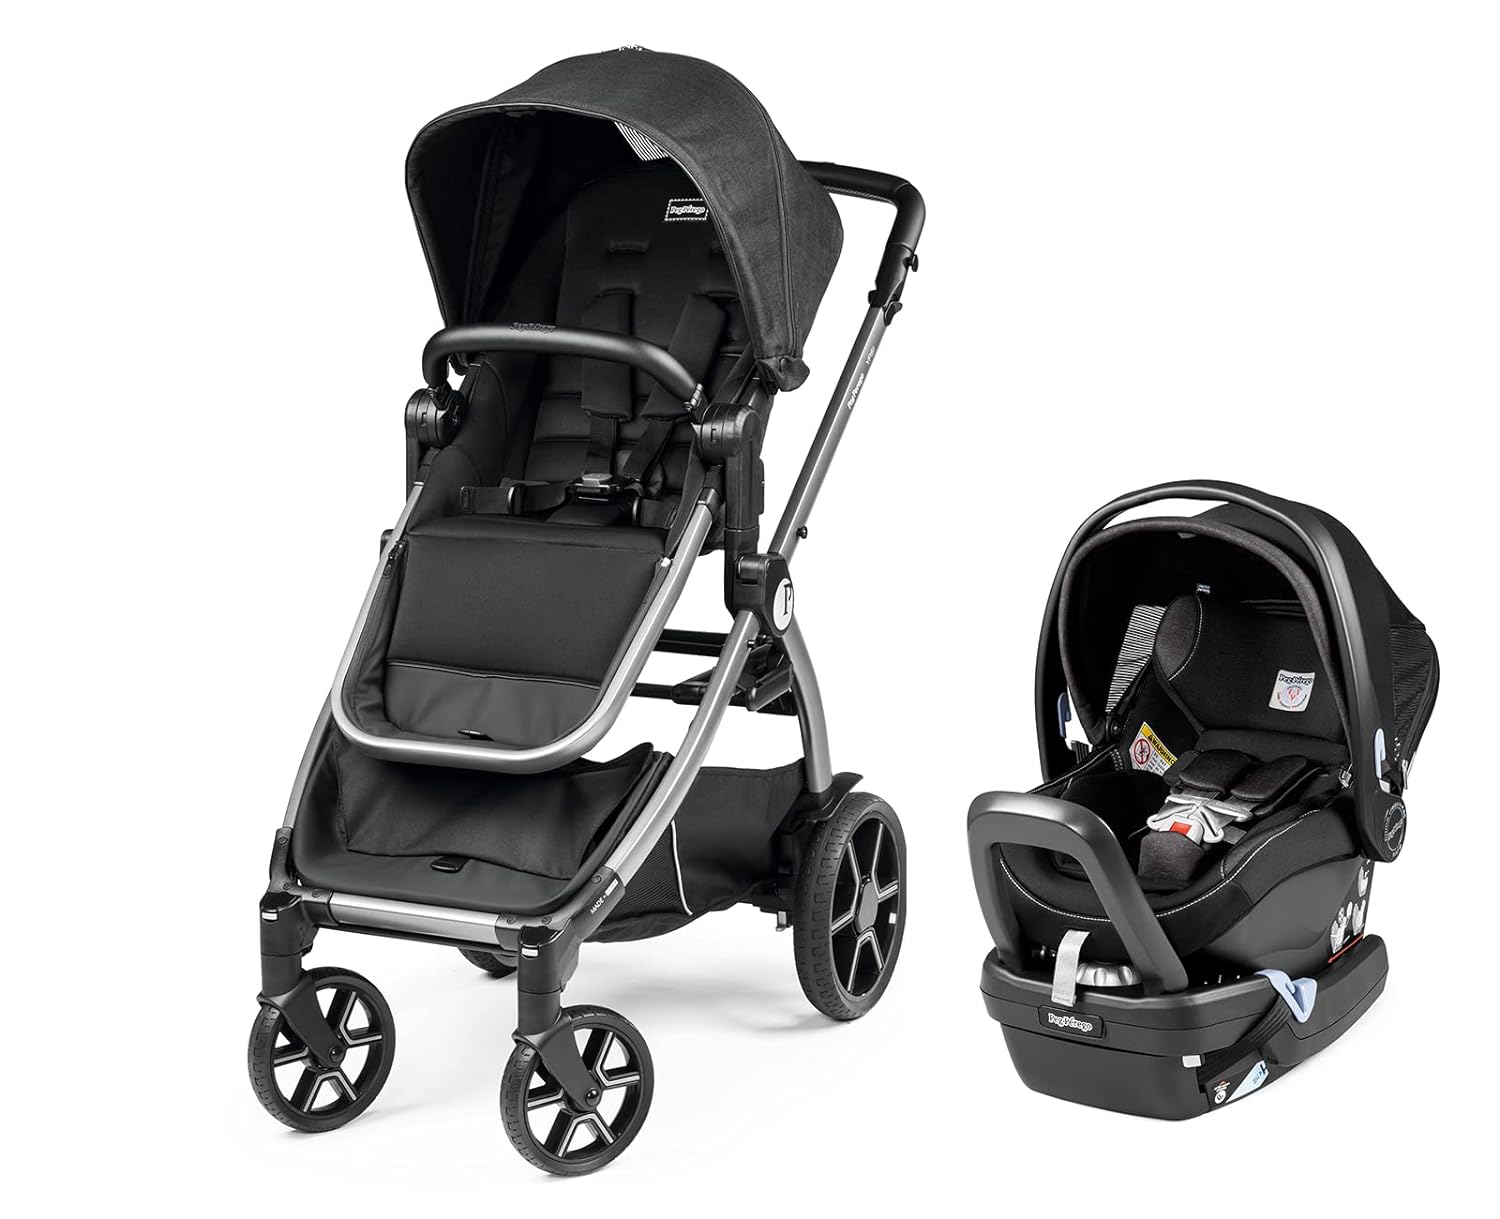 Peg Perego Ypsi Travel System Review